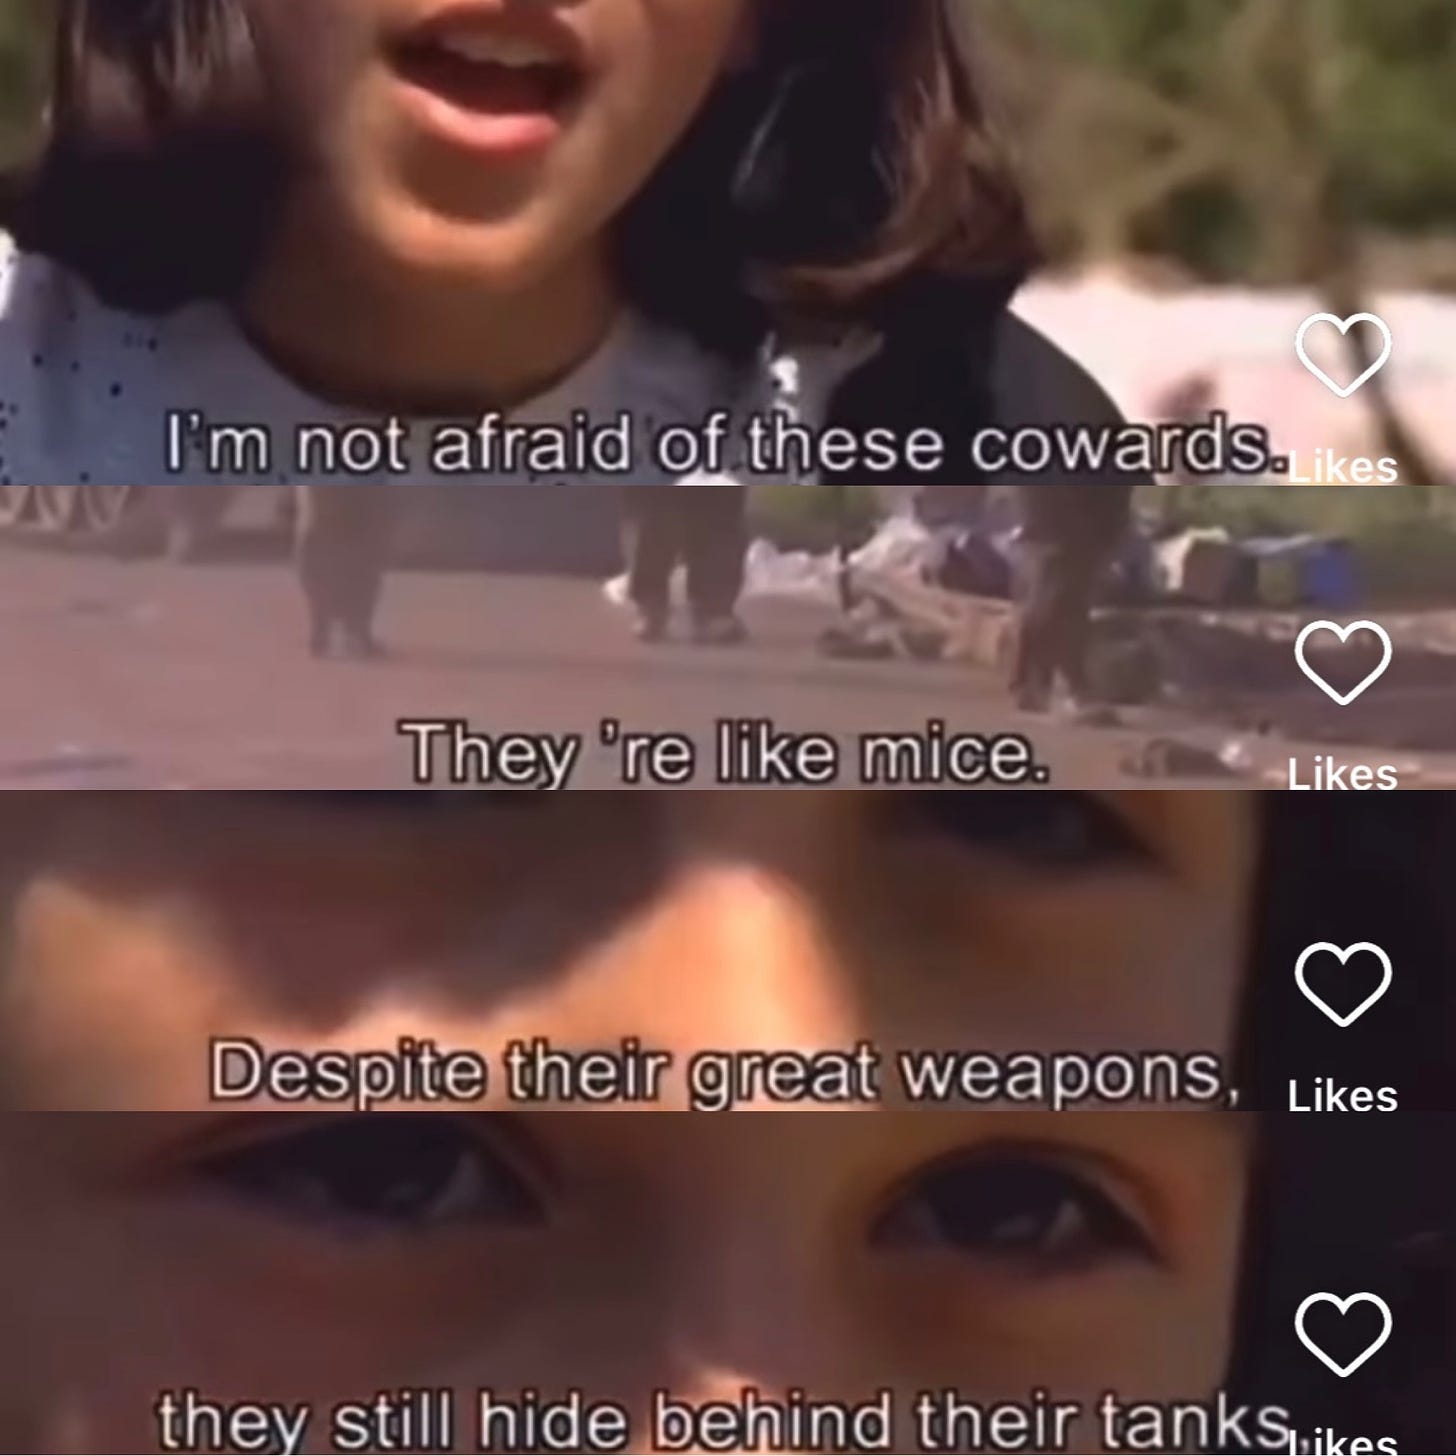 Split screenshots of a young Palestinian girl talking her shit about how the Israelis are cowards who hide behind their tanks. "they're like mice" she says.